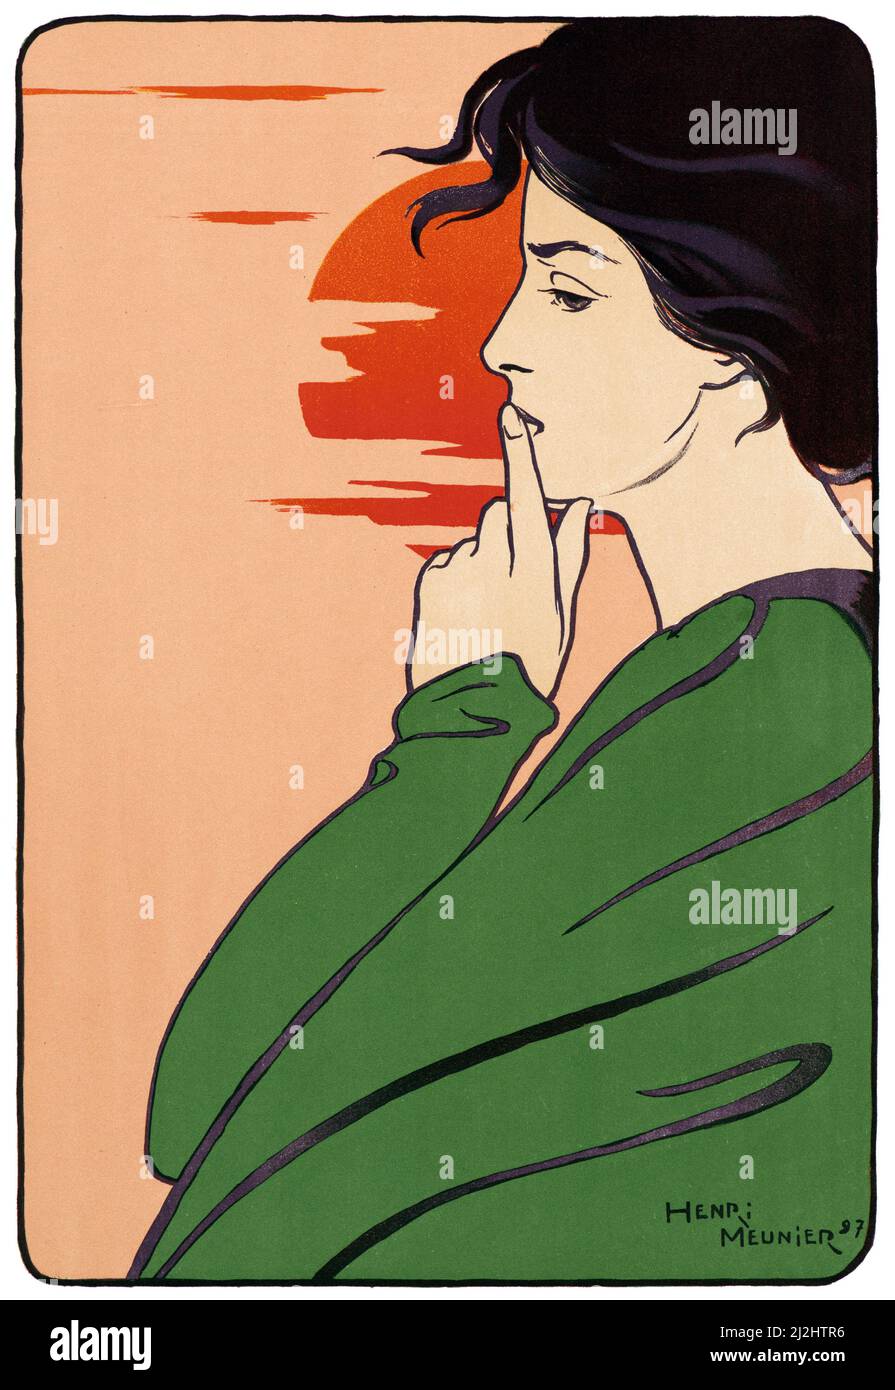 Georges Meunier, belle epoque, vintage poster, L'Heure du Silence (1897). The Hour of Silence. Stock Photo